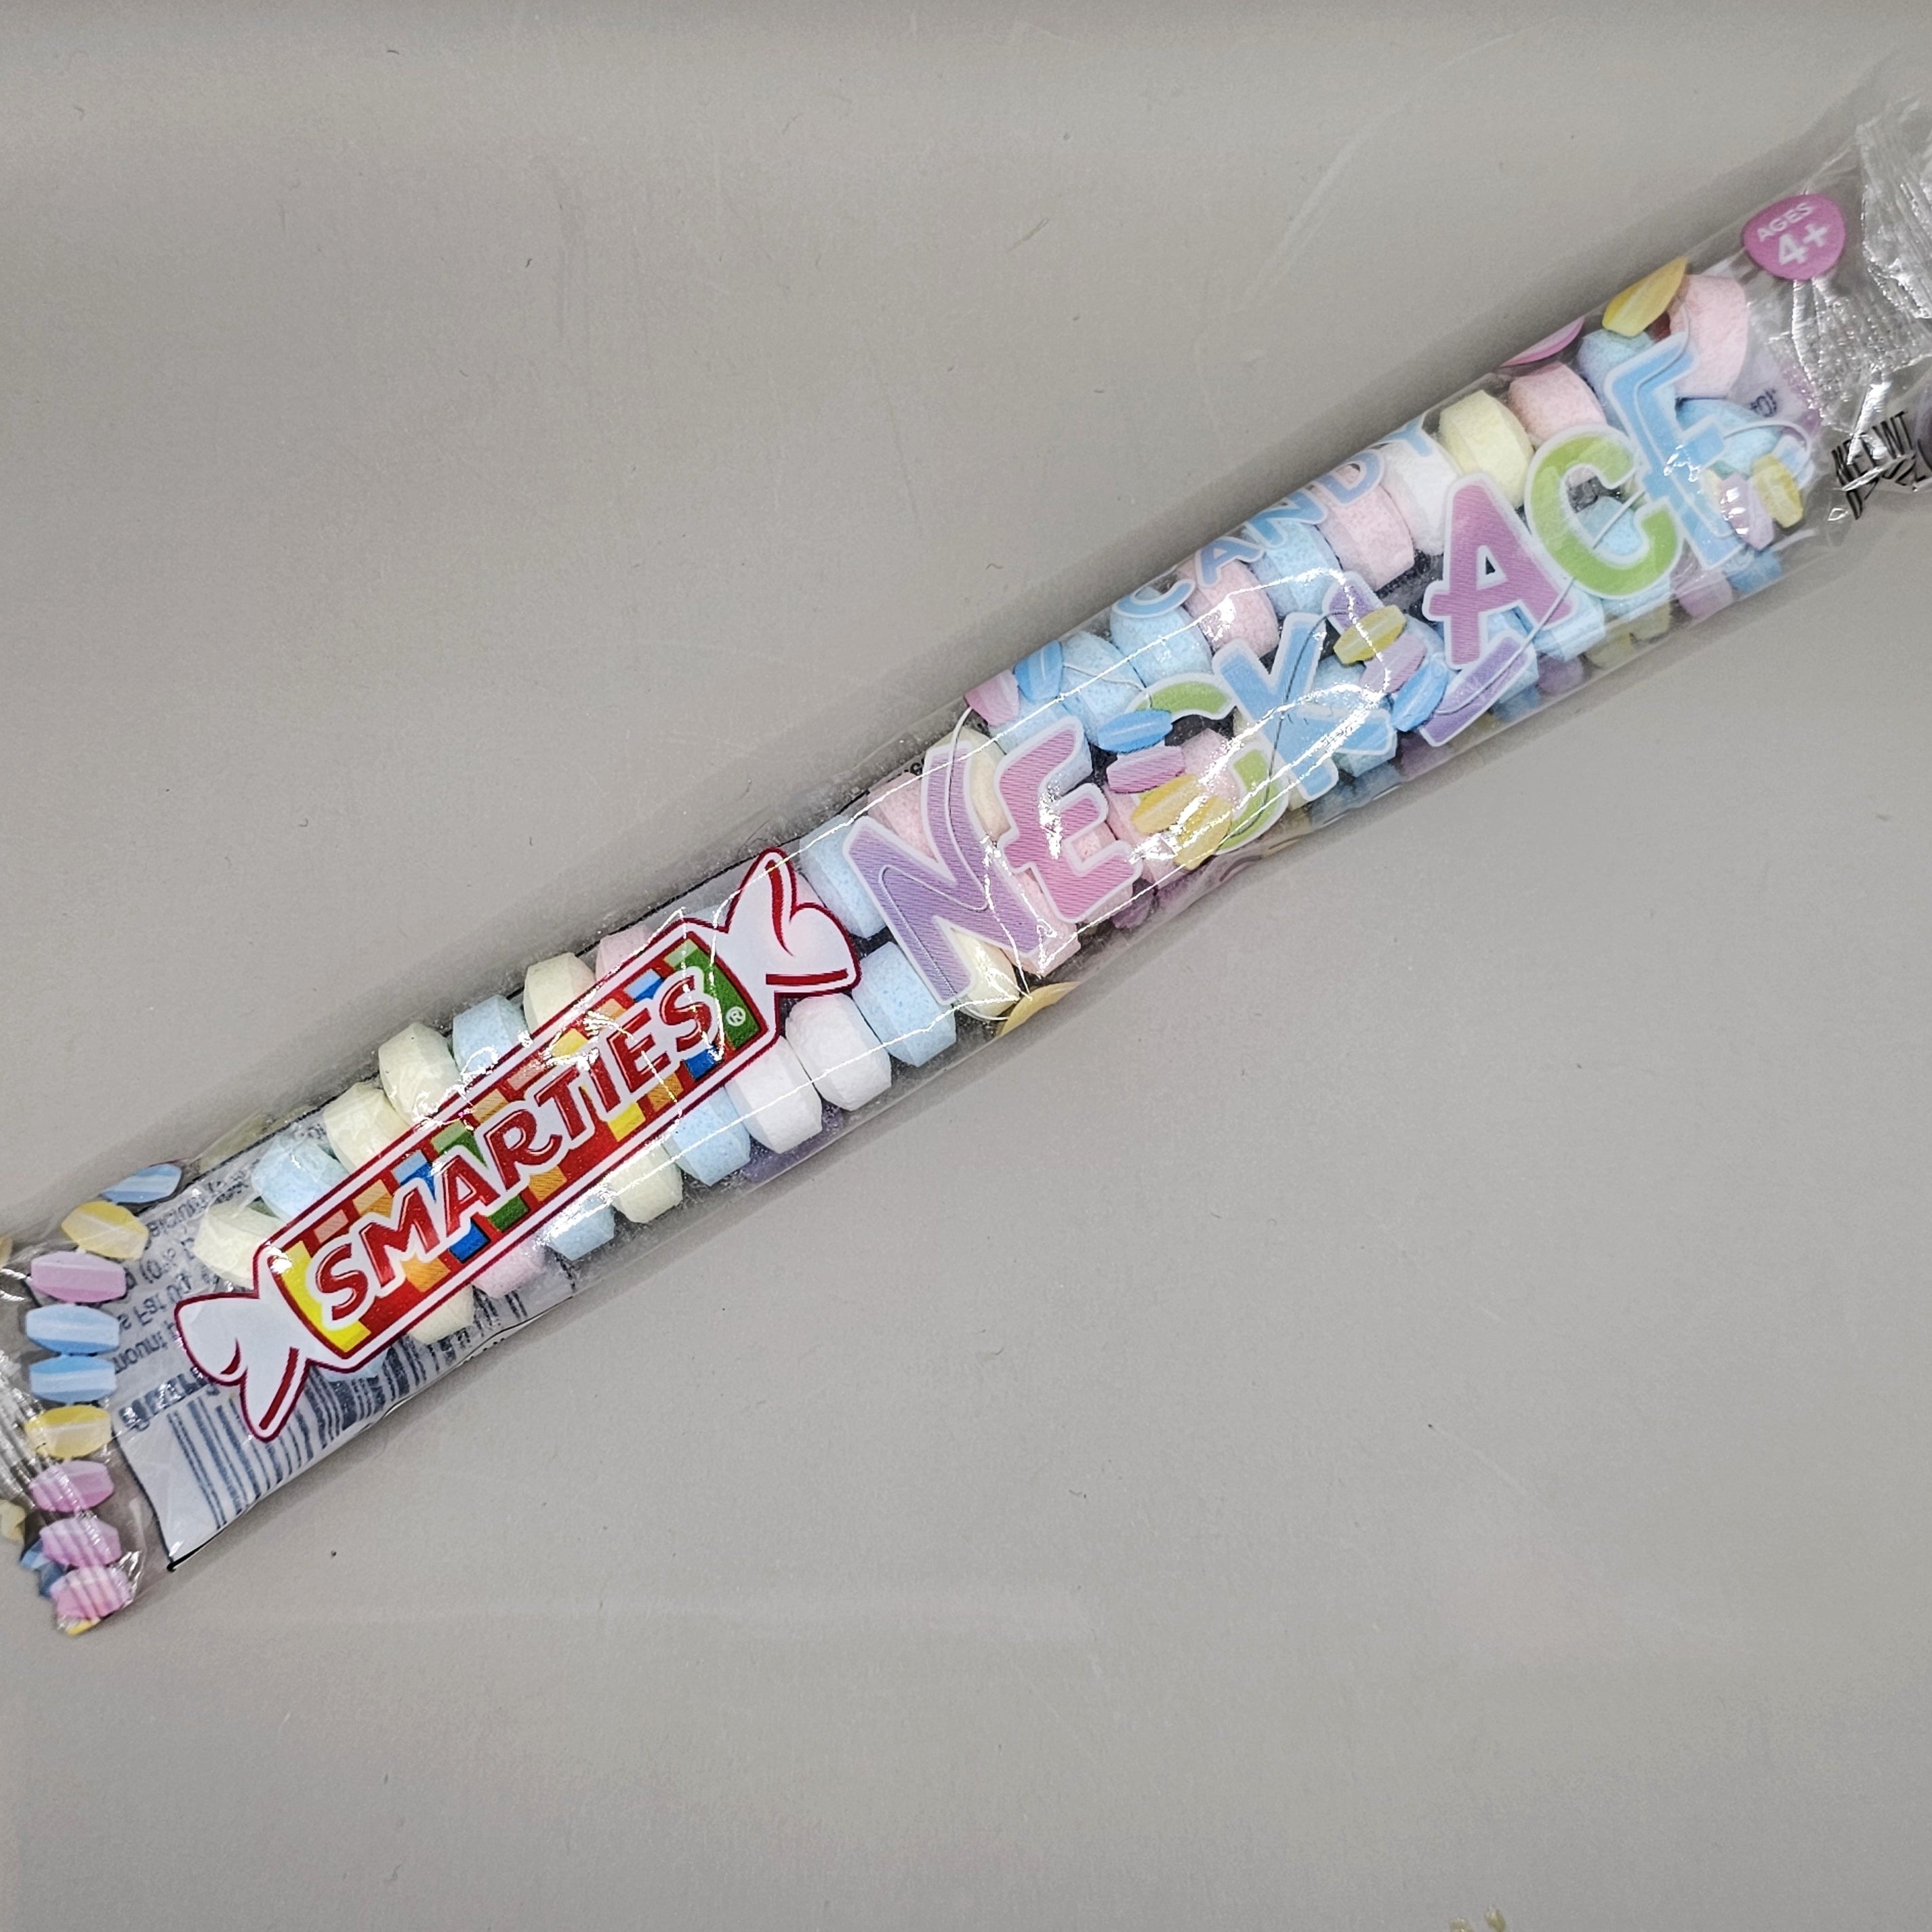 Wrapped candy necklace.